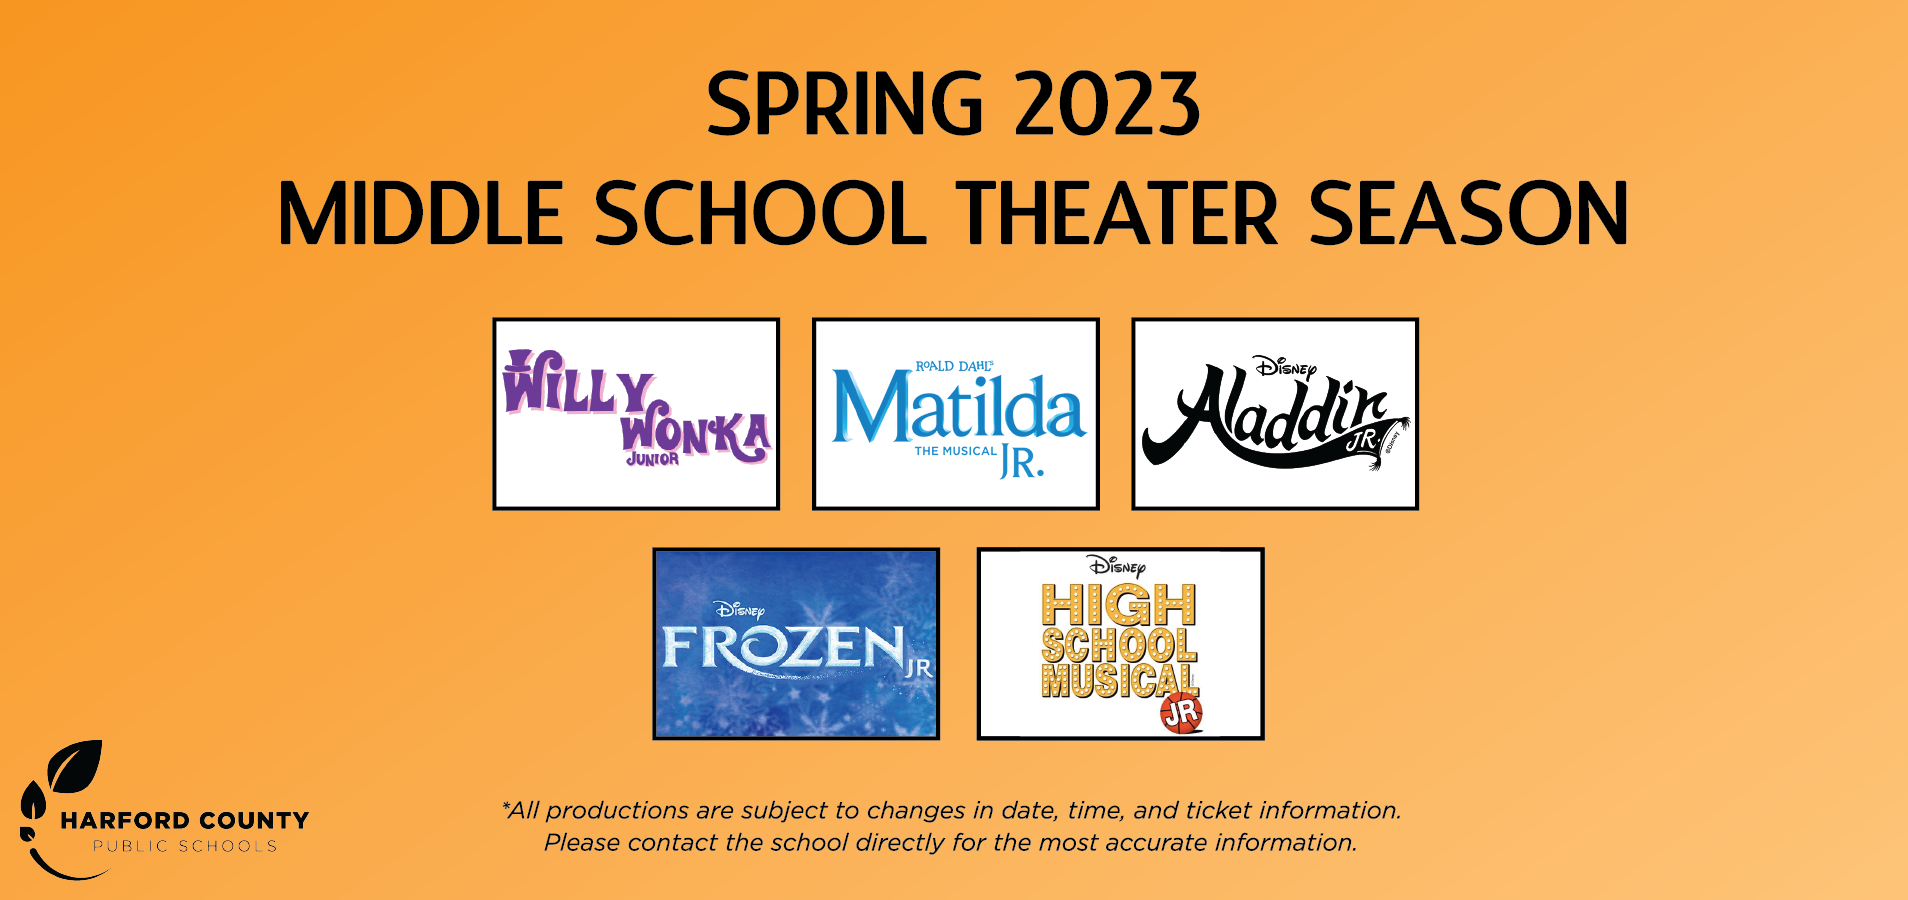 Middle School Spring 2023 Theater Schedule